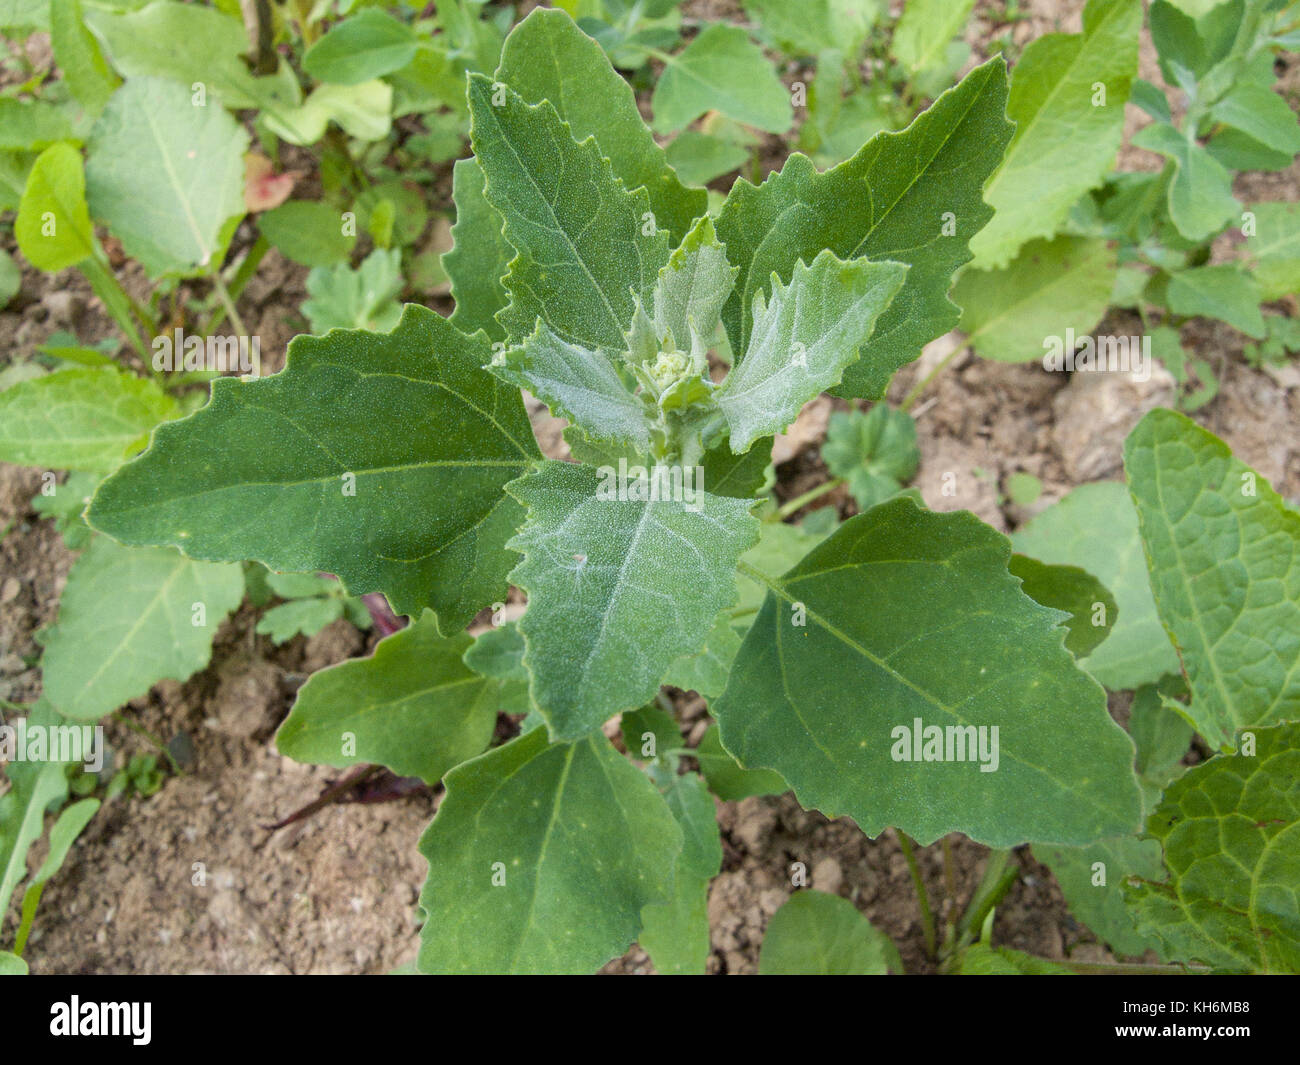 Leaves of Fat-Hen, White Goosefoot / Chenopodium album - a weed that is edible and was once regularly used as food. Now a foraged wild / survival food Stock Photo